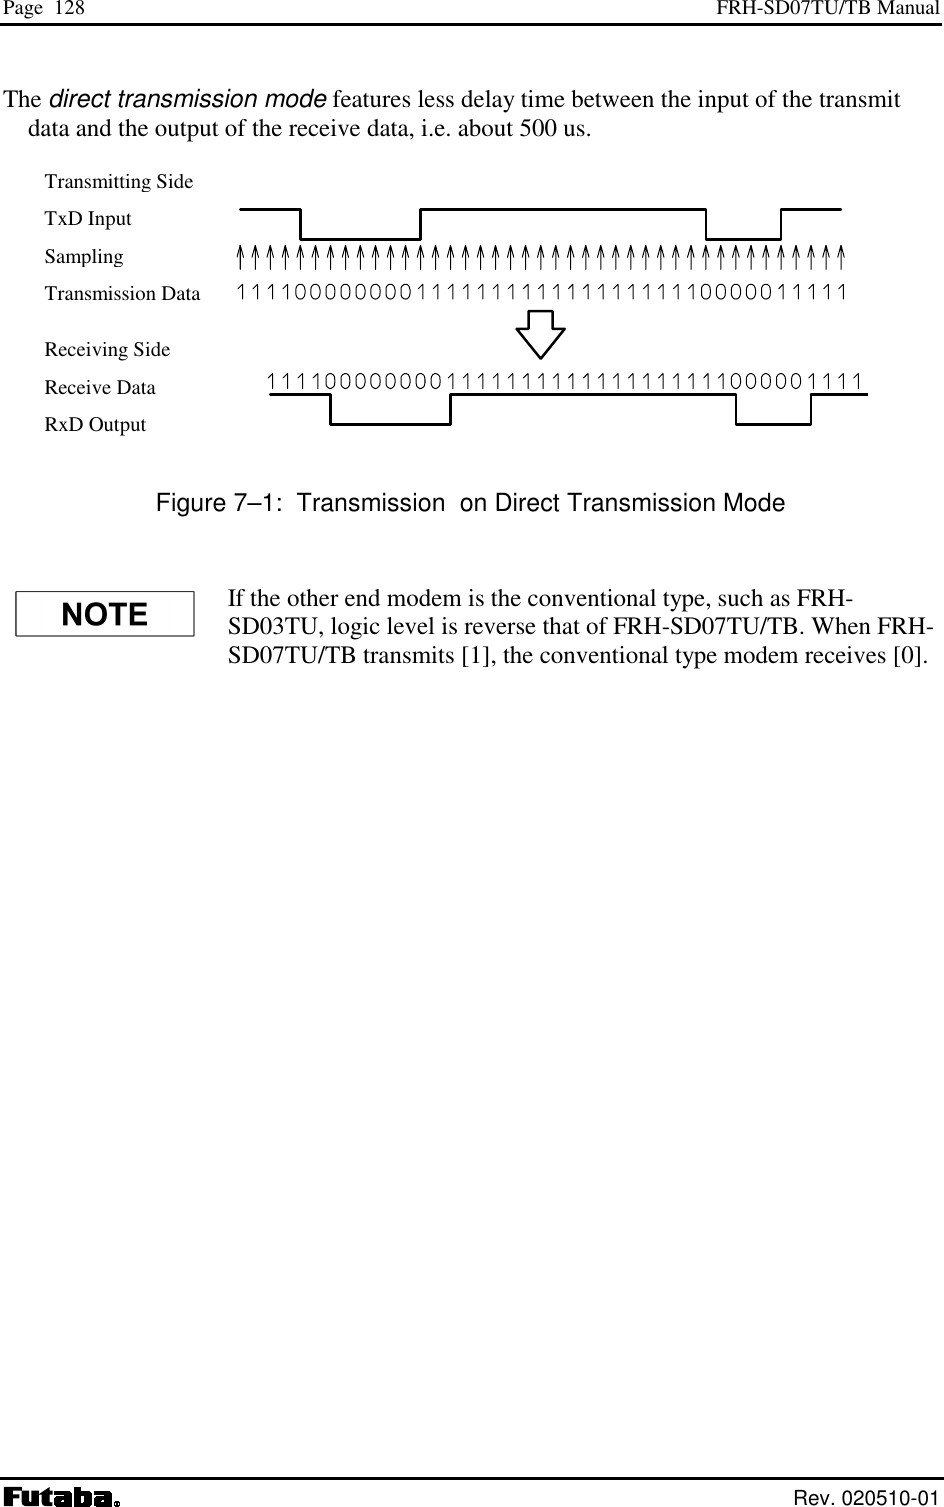 Page  128  FRH-SD07TU/TB Manual  Rev. 020510-01 The direct transmission mode features less delay time between the input of the transmit data and the output of the receive data, i.e. about 500 us.                   Figure 7–1:  Transmission  on Direct Transmission Mode If the other end modem is the conventional type, such as FRH-SD03TU, logic level is reverse that of FRH-SD07TU/TB. When FRH-SD07TU/TB transmits [1], the conventional type modem receives [0].     Transmitting Side TxD Input Sampling Transmission Data Receiving Side Receive Data RxD Output 